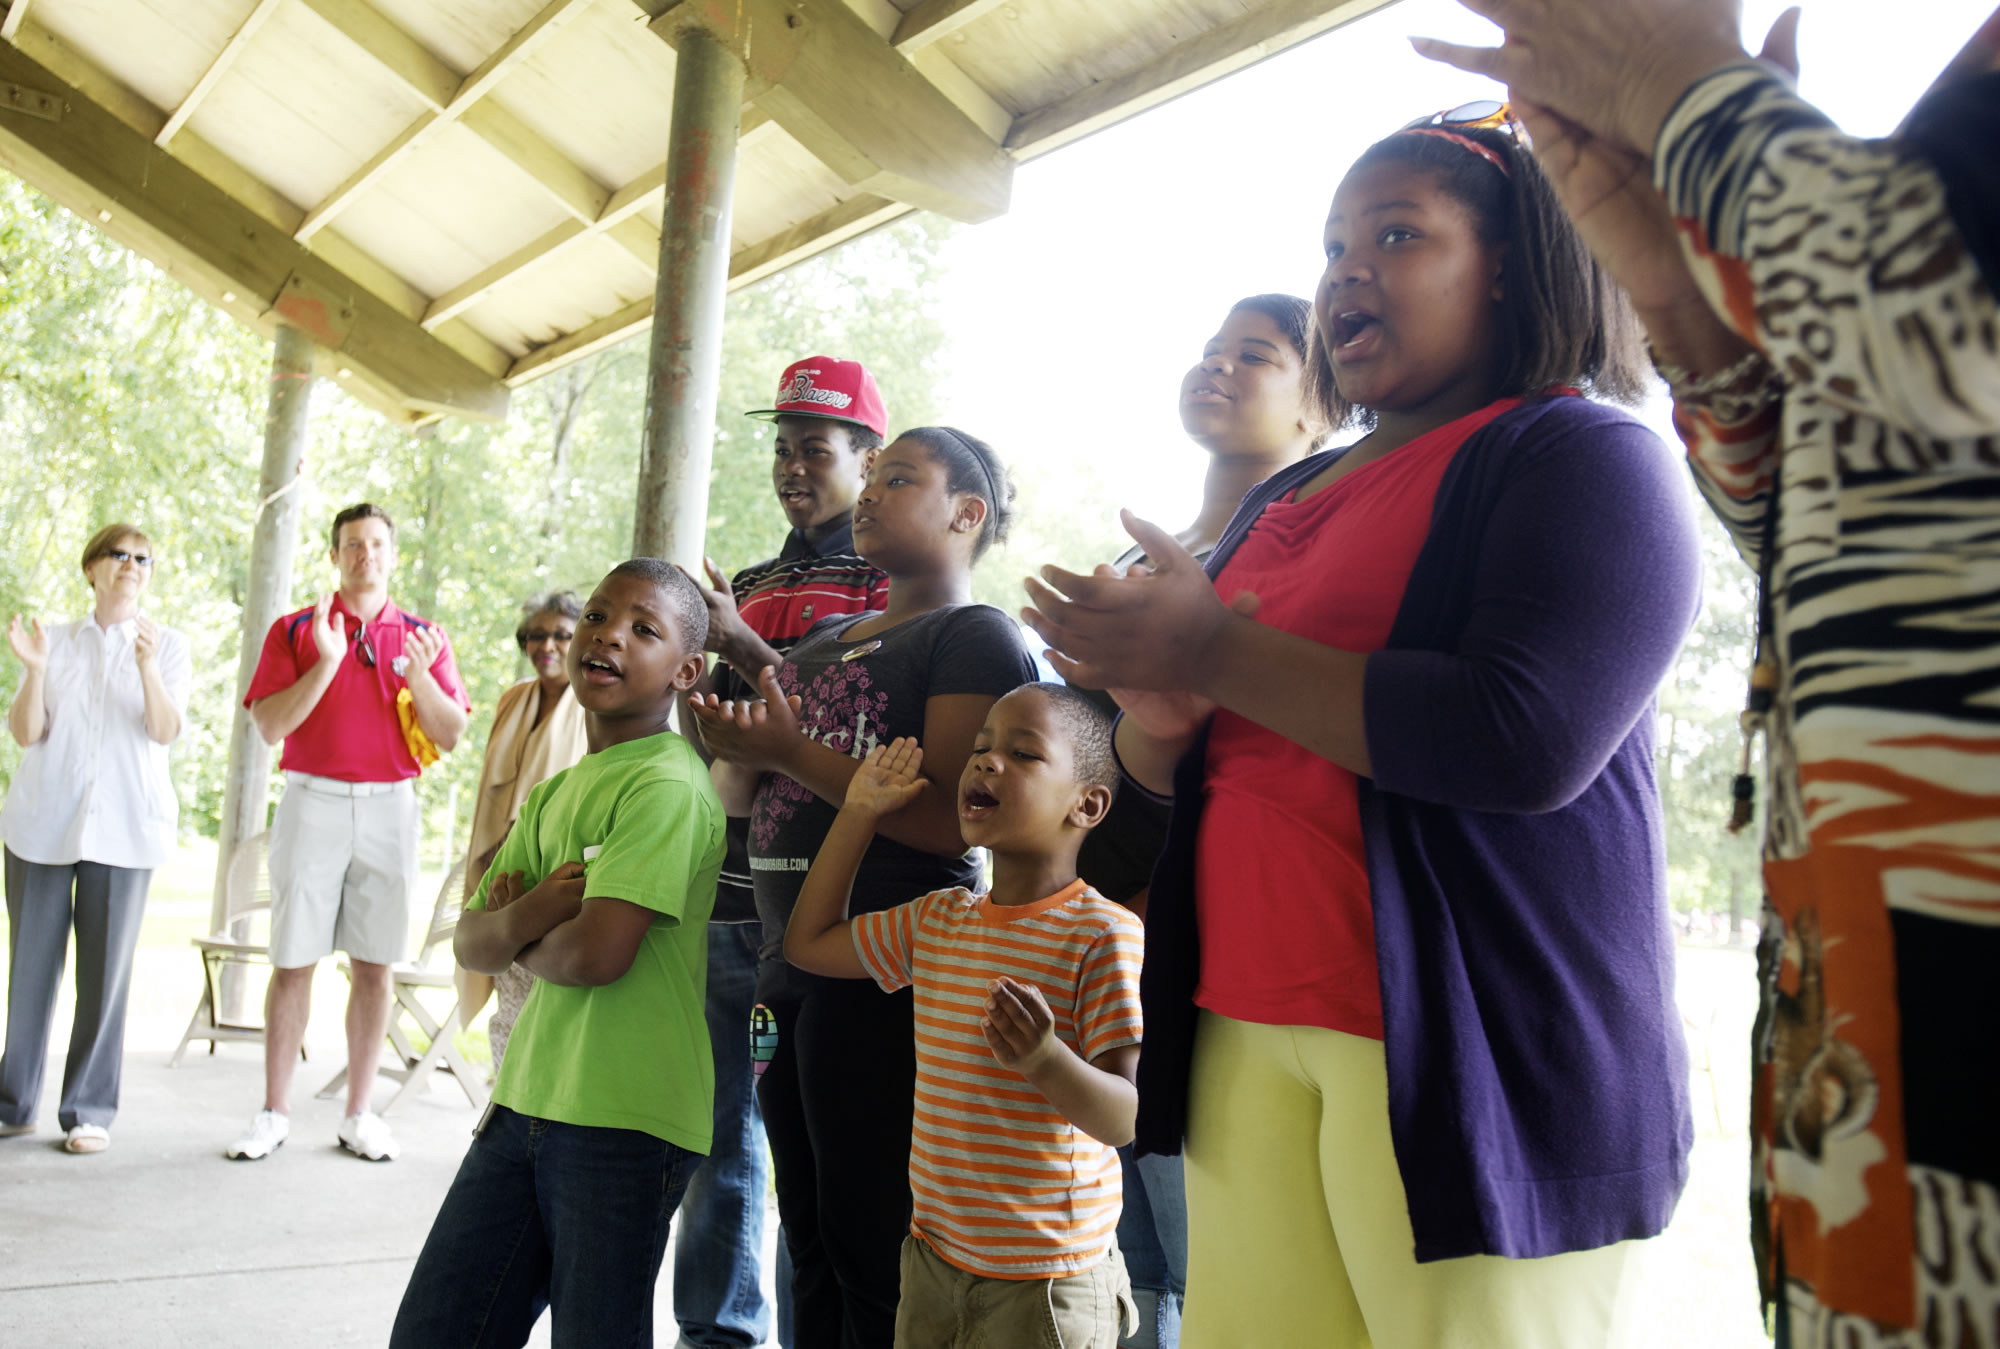 Ethell Tillis, far right, leads 6 of her 26 grandchildren, from left, Nickelas Butcher, 6, Quintin Nickelson, 15, Hfope Butcher, 12, Jabar Thomas, 4, Grace Nickelson, 14, and Fayth Butcher, 12, as they sing &quot;Oh Happy Day&quot; on Saturday at the Juneteenth celebration at Marine Park in Vancouver.